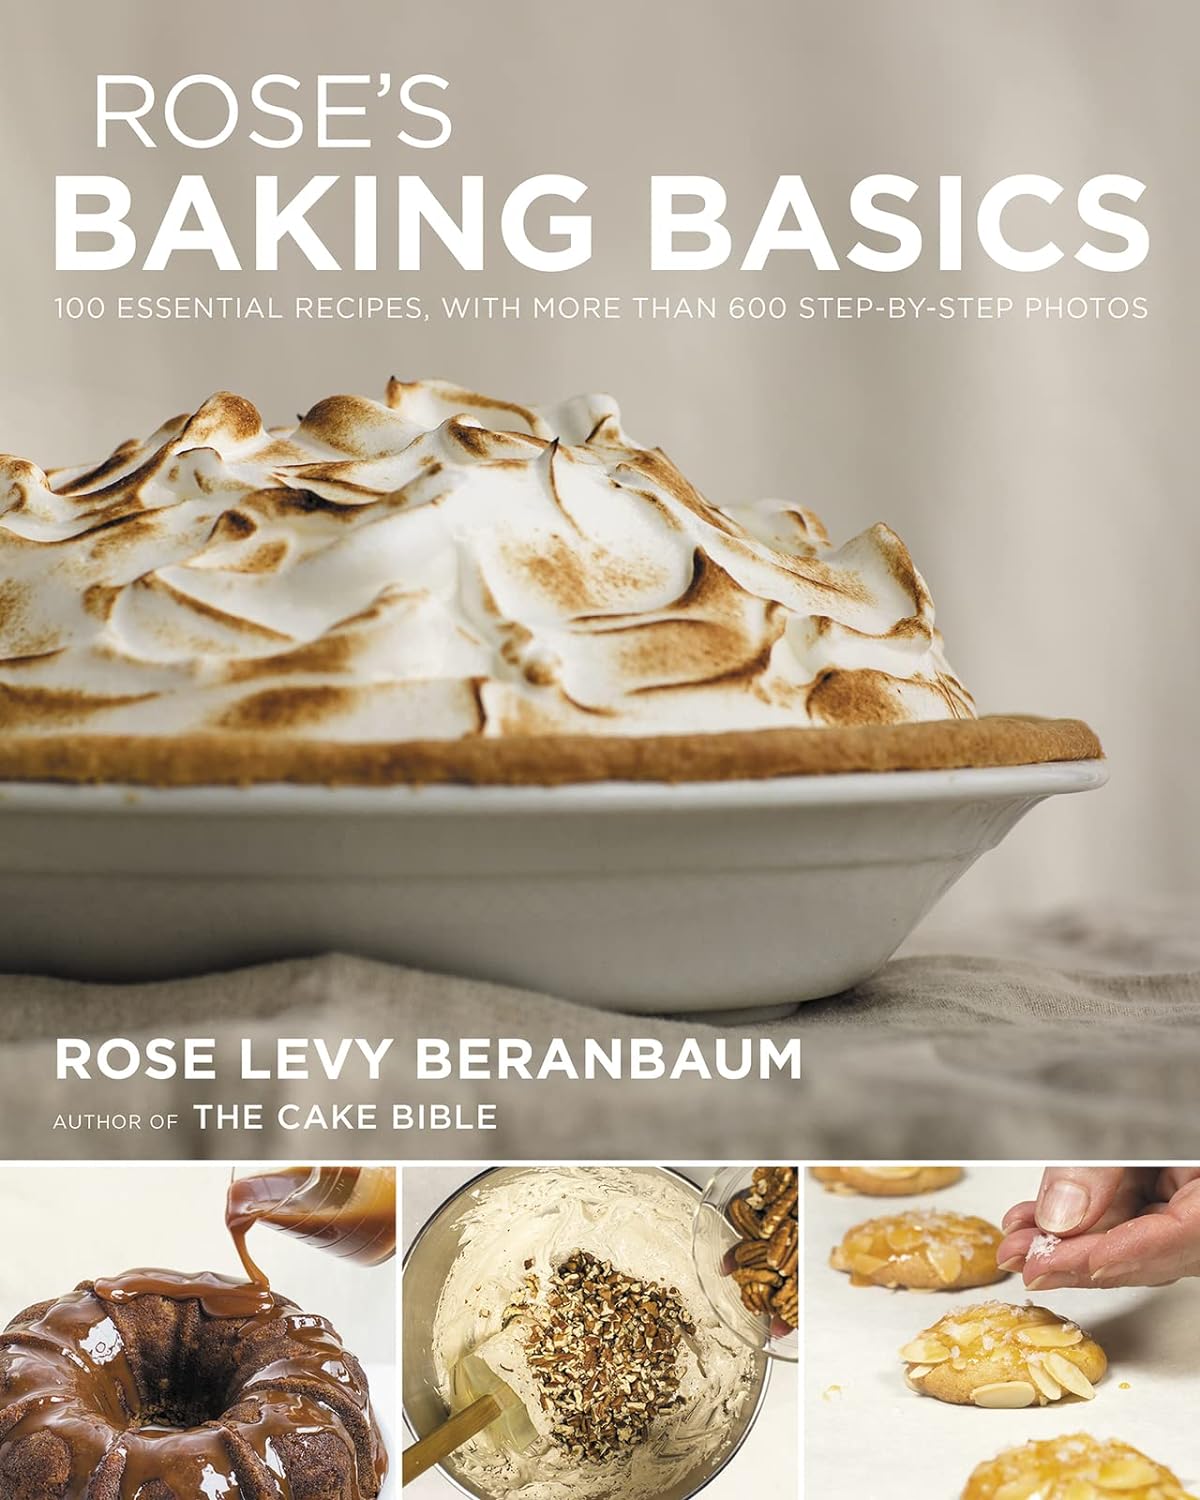 Rose's Baking Basics: 100 Essential Recipes, with More Than 600 Step-by-Step (Rose Levy Beranbaum)